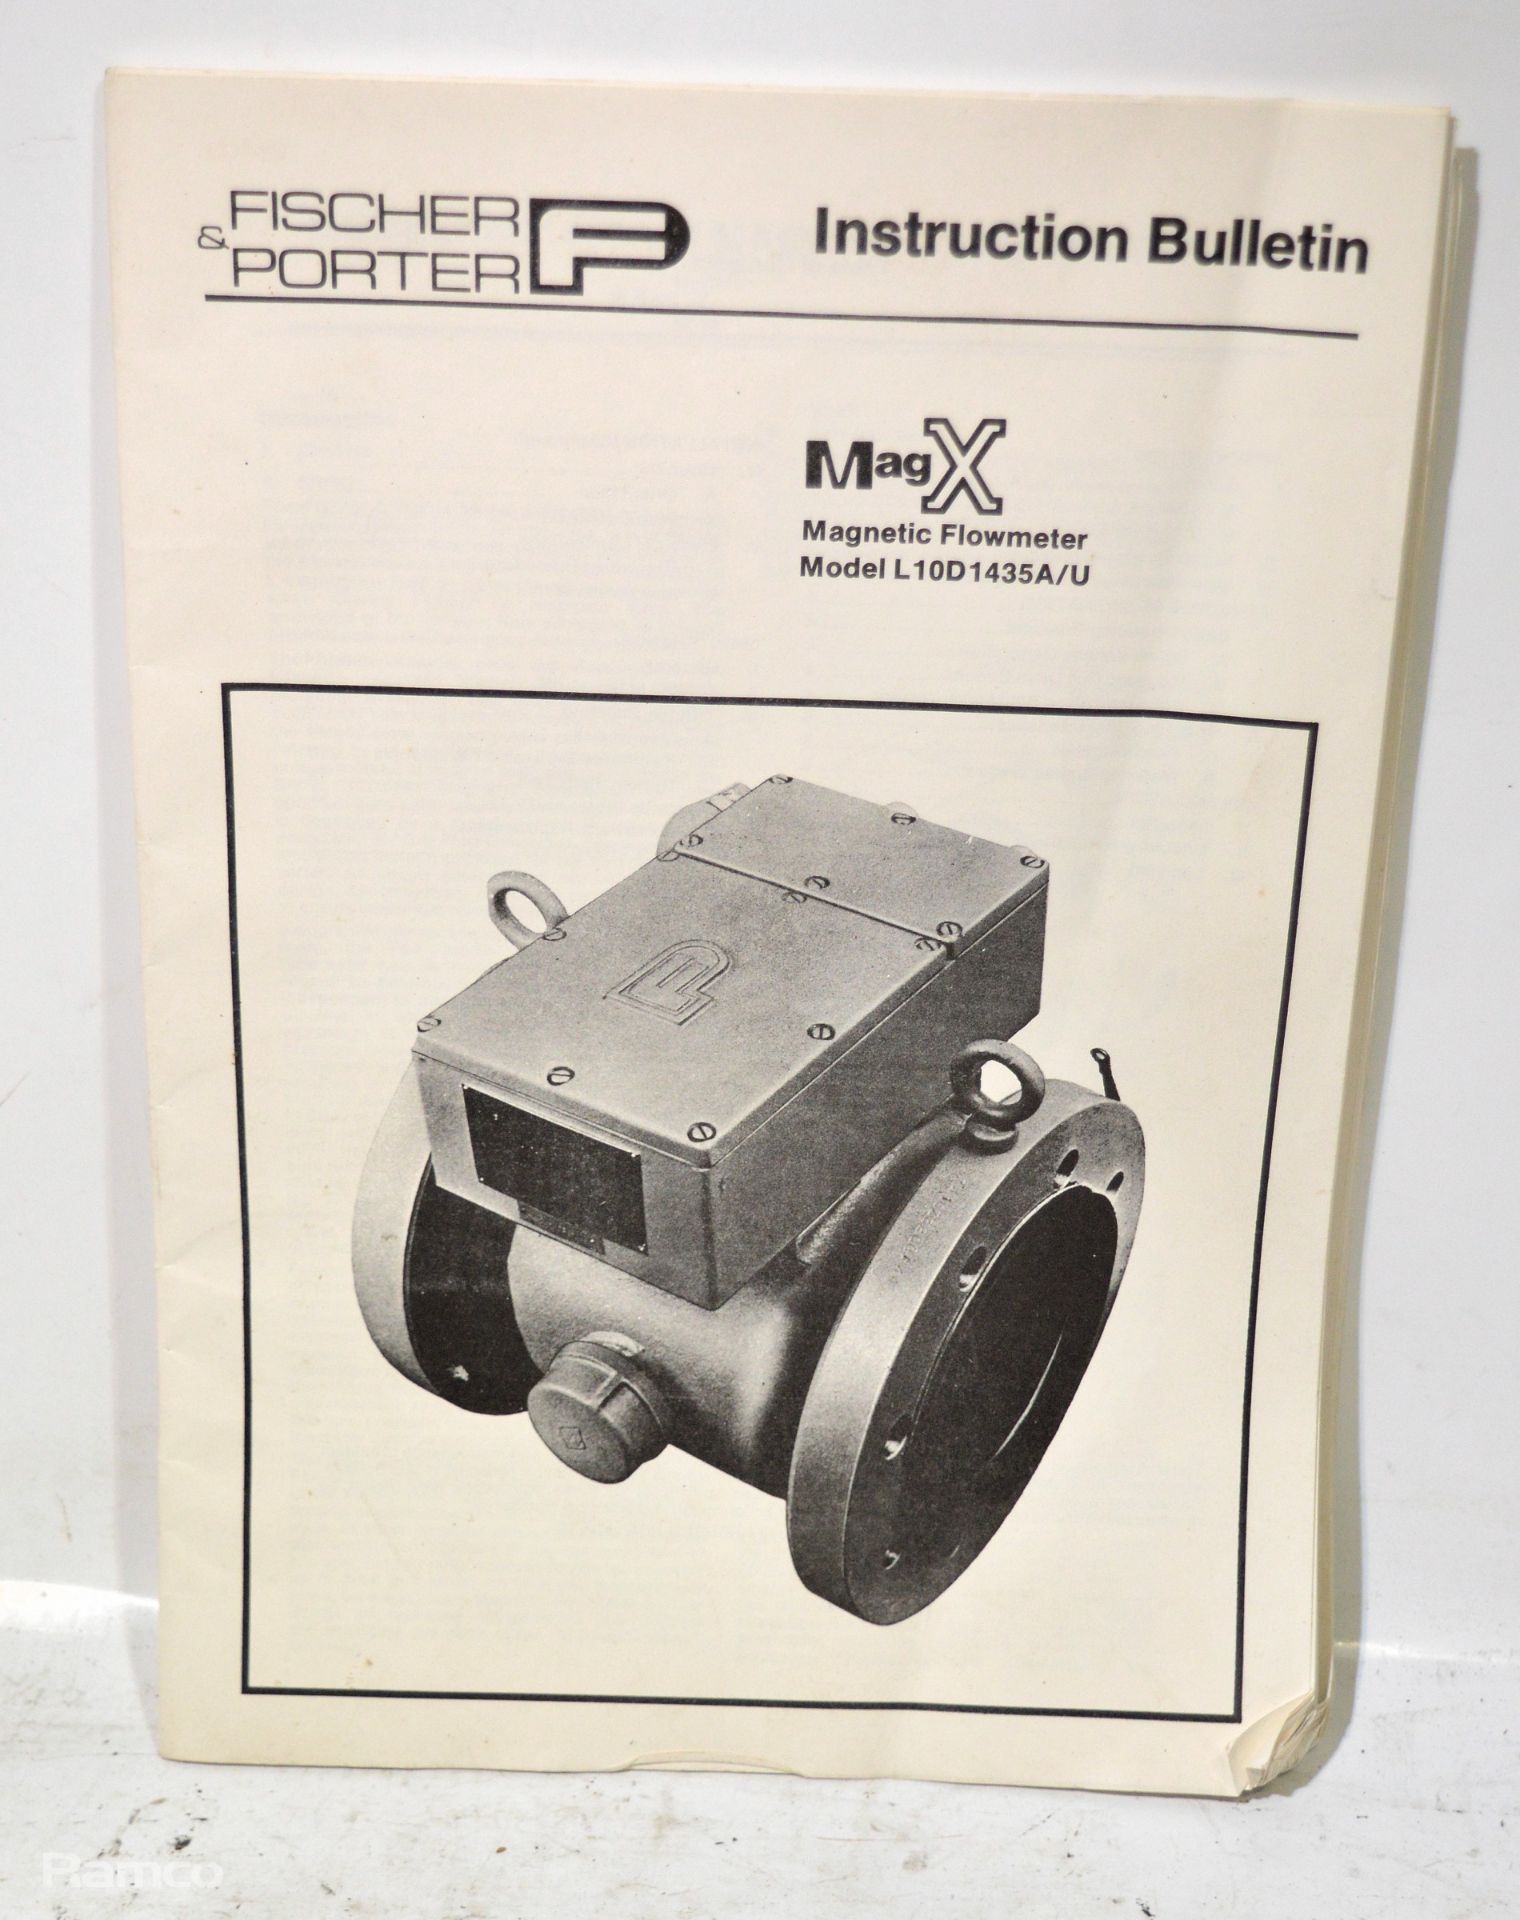 Mag-X Fiscer Porter Magnetic flow meter - model L10D - 1435A/U - unused with instructions - Image 6 of 7